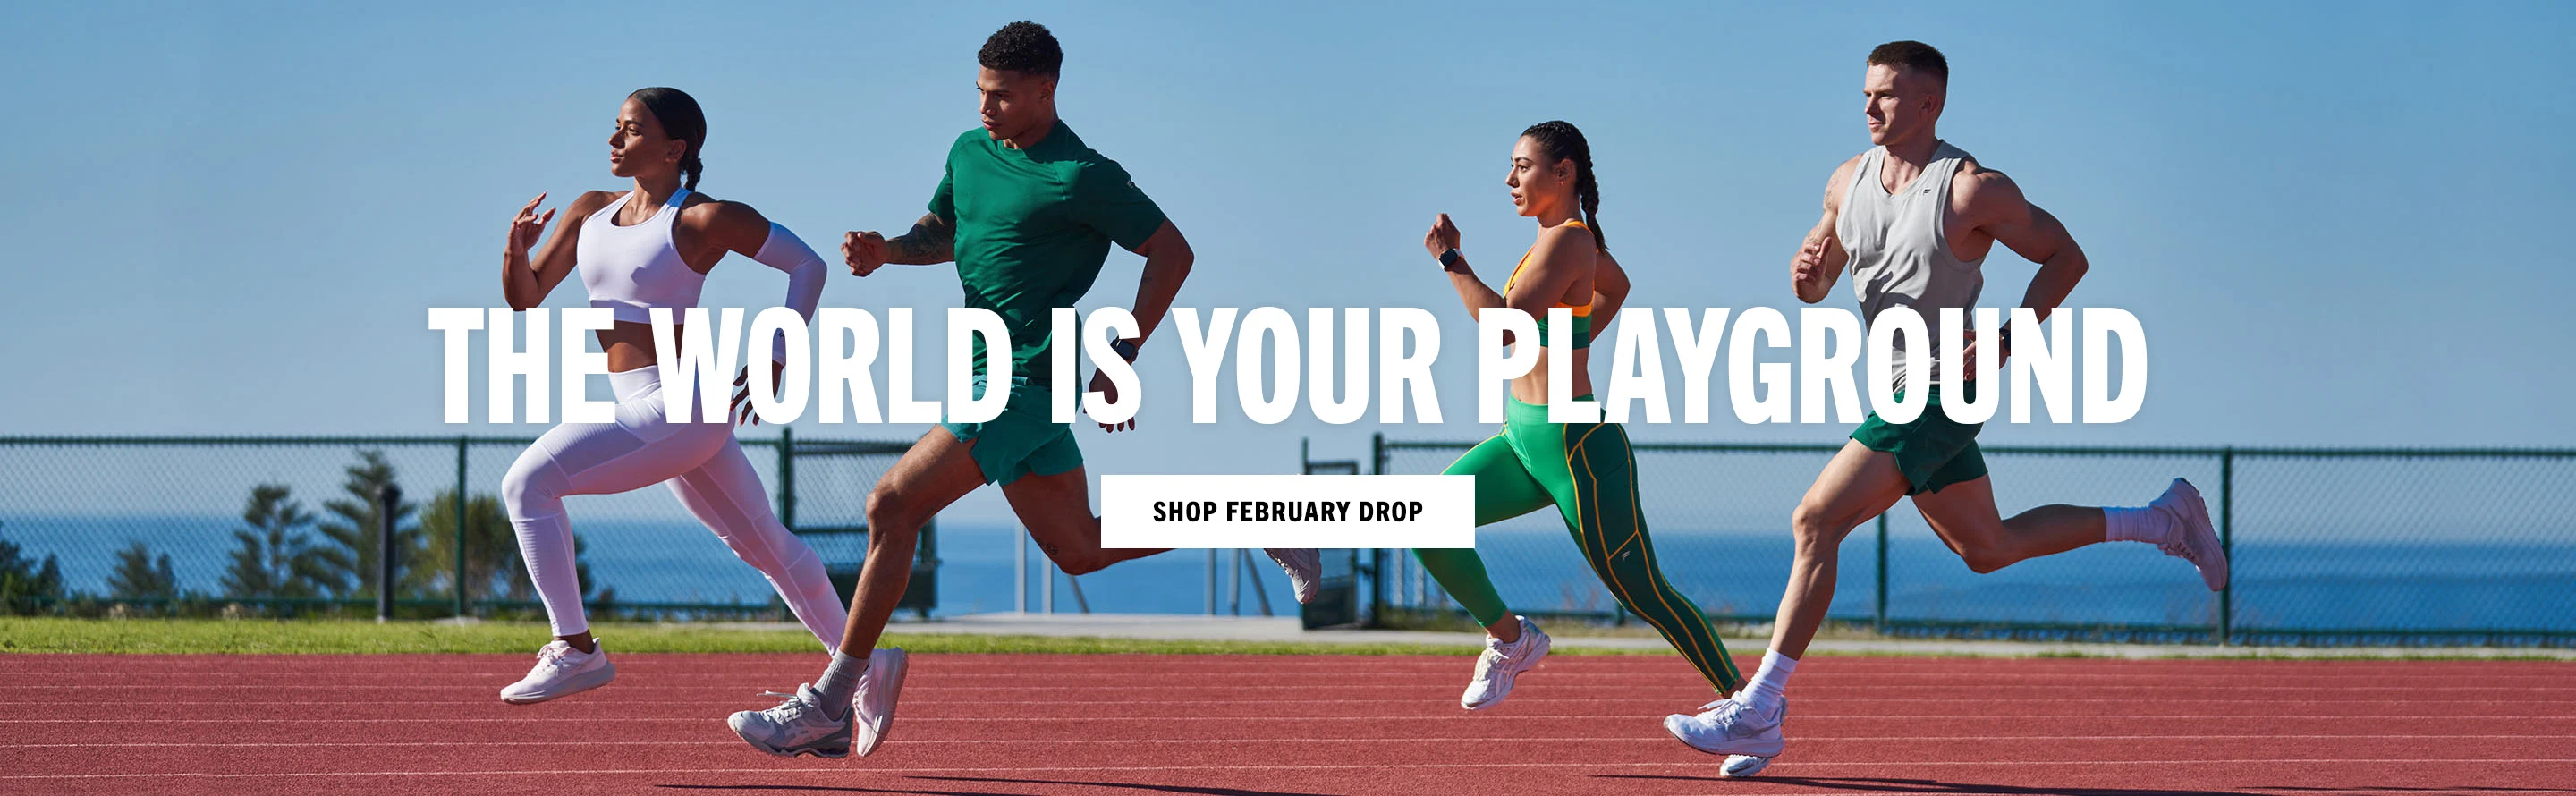 Fabletics February 2022 Selection Time: Featuring The New Luxe 360